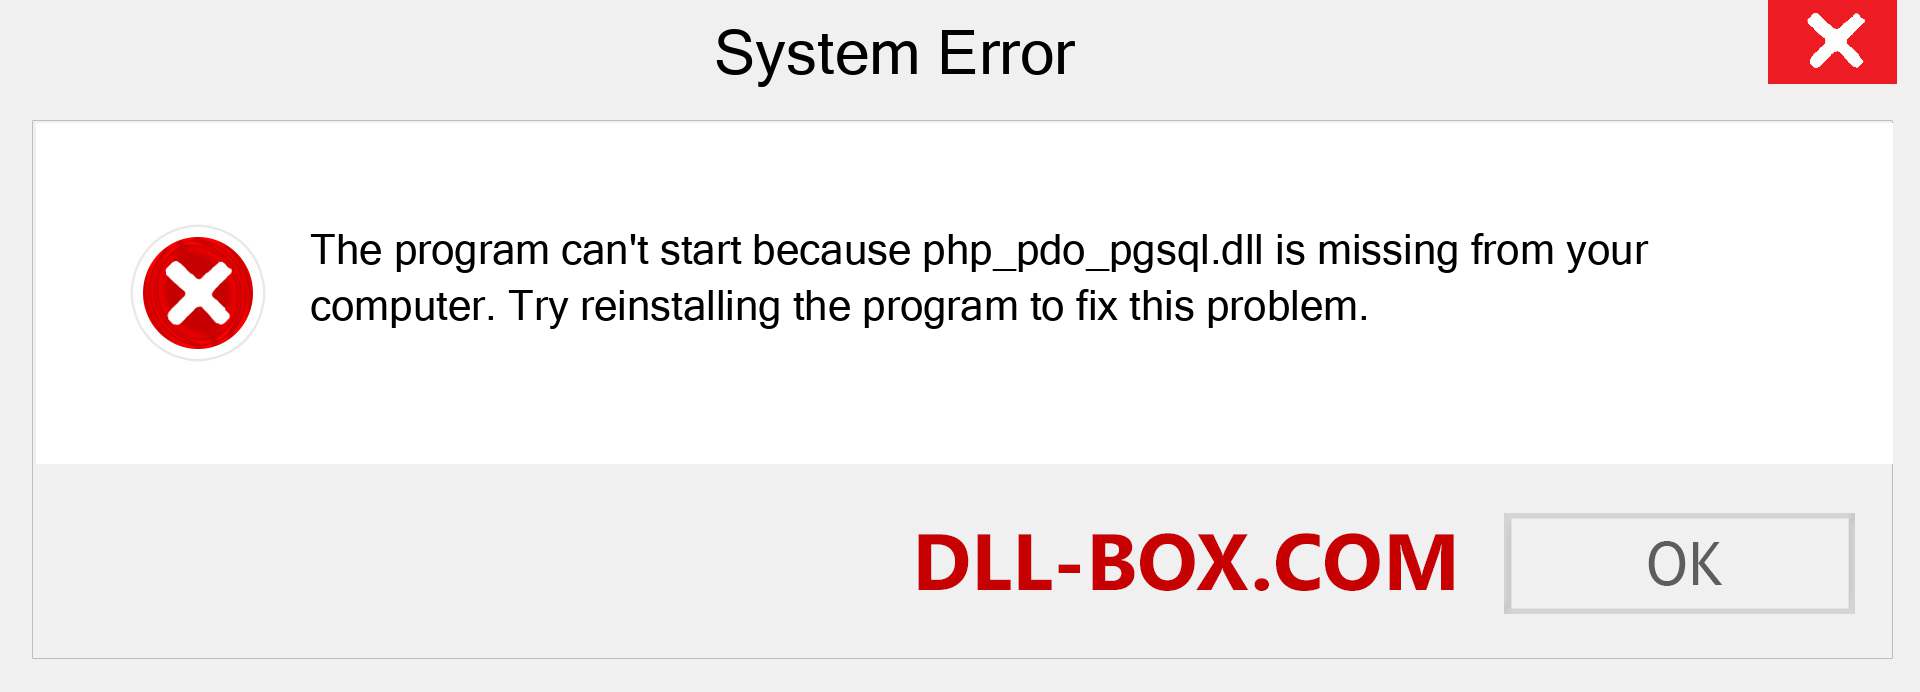  php_pdo_pgsql.dll file is missing?. Download for Windows 7, 8, 10 - Fix  php_pdo_pgsql dll Missing Error on Windows, photos, images